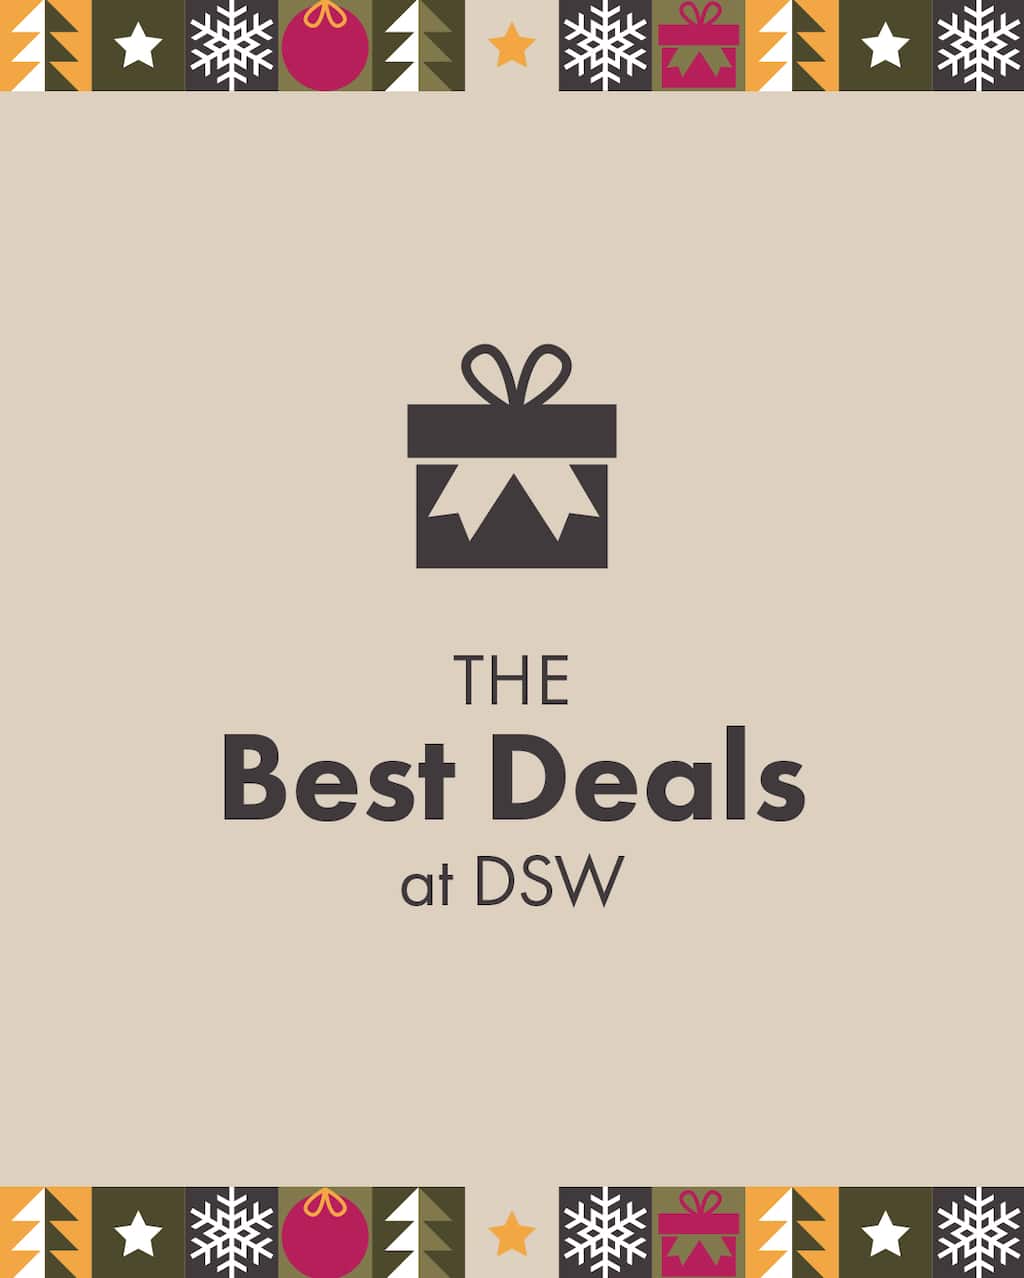 Best  Finds under $5 - Check Out This List of Deals!